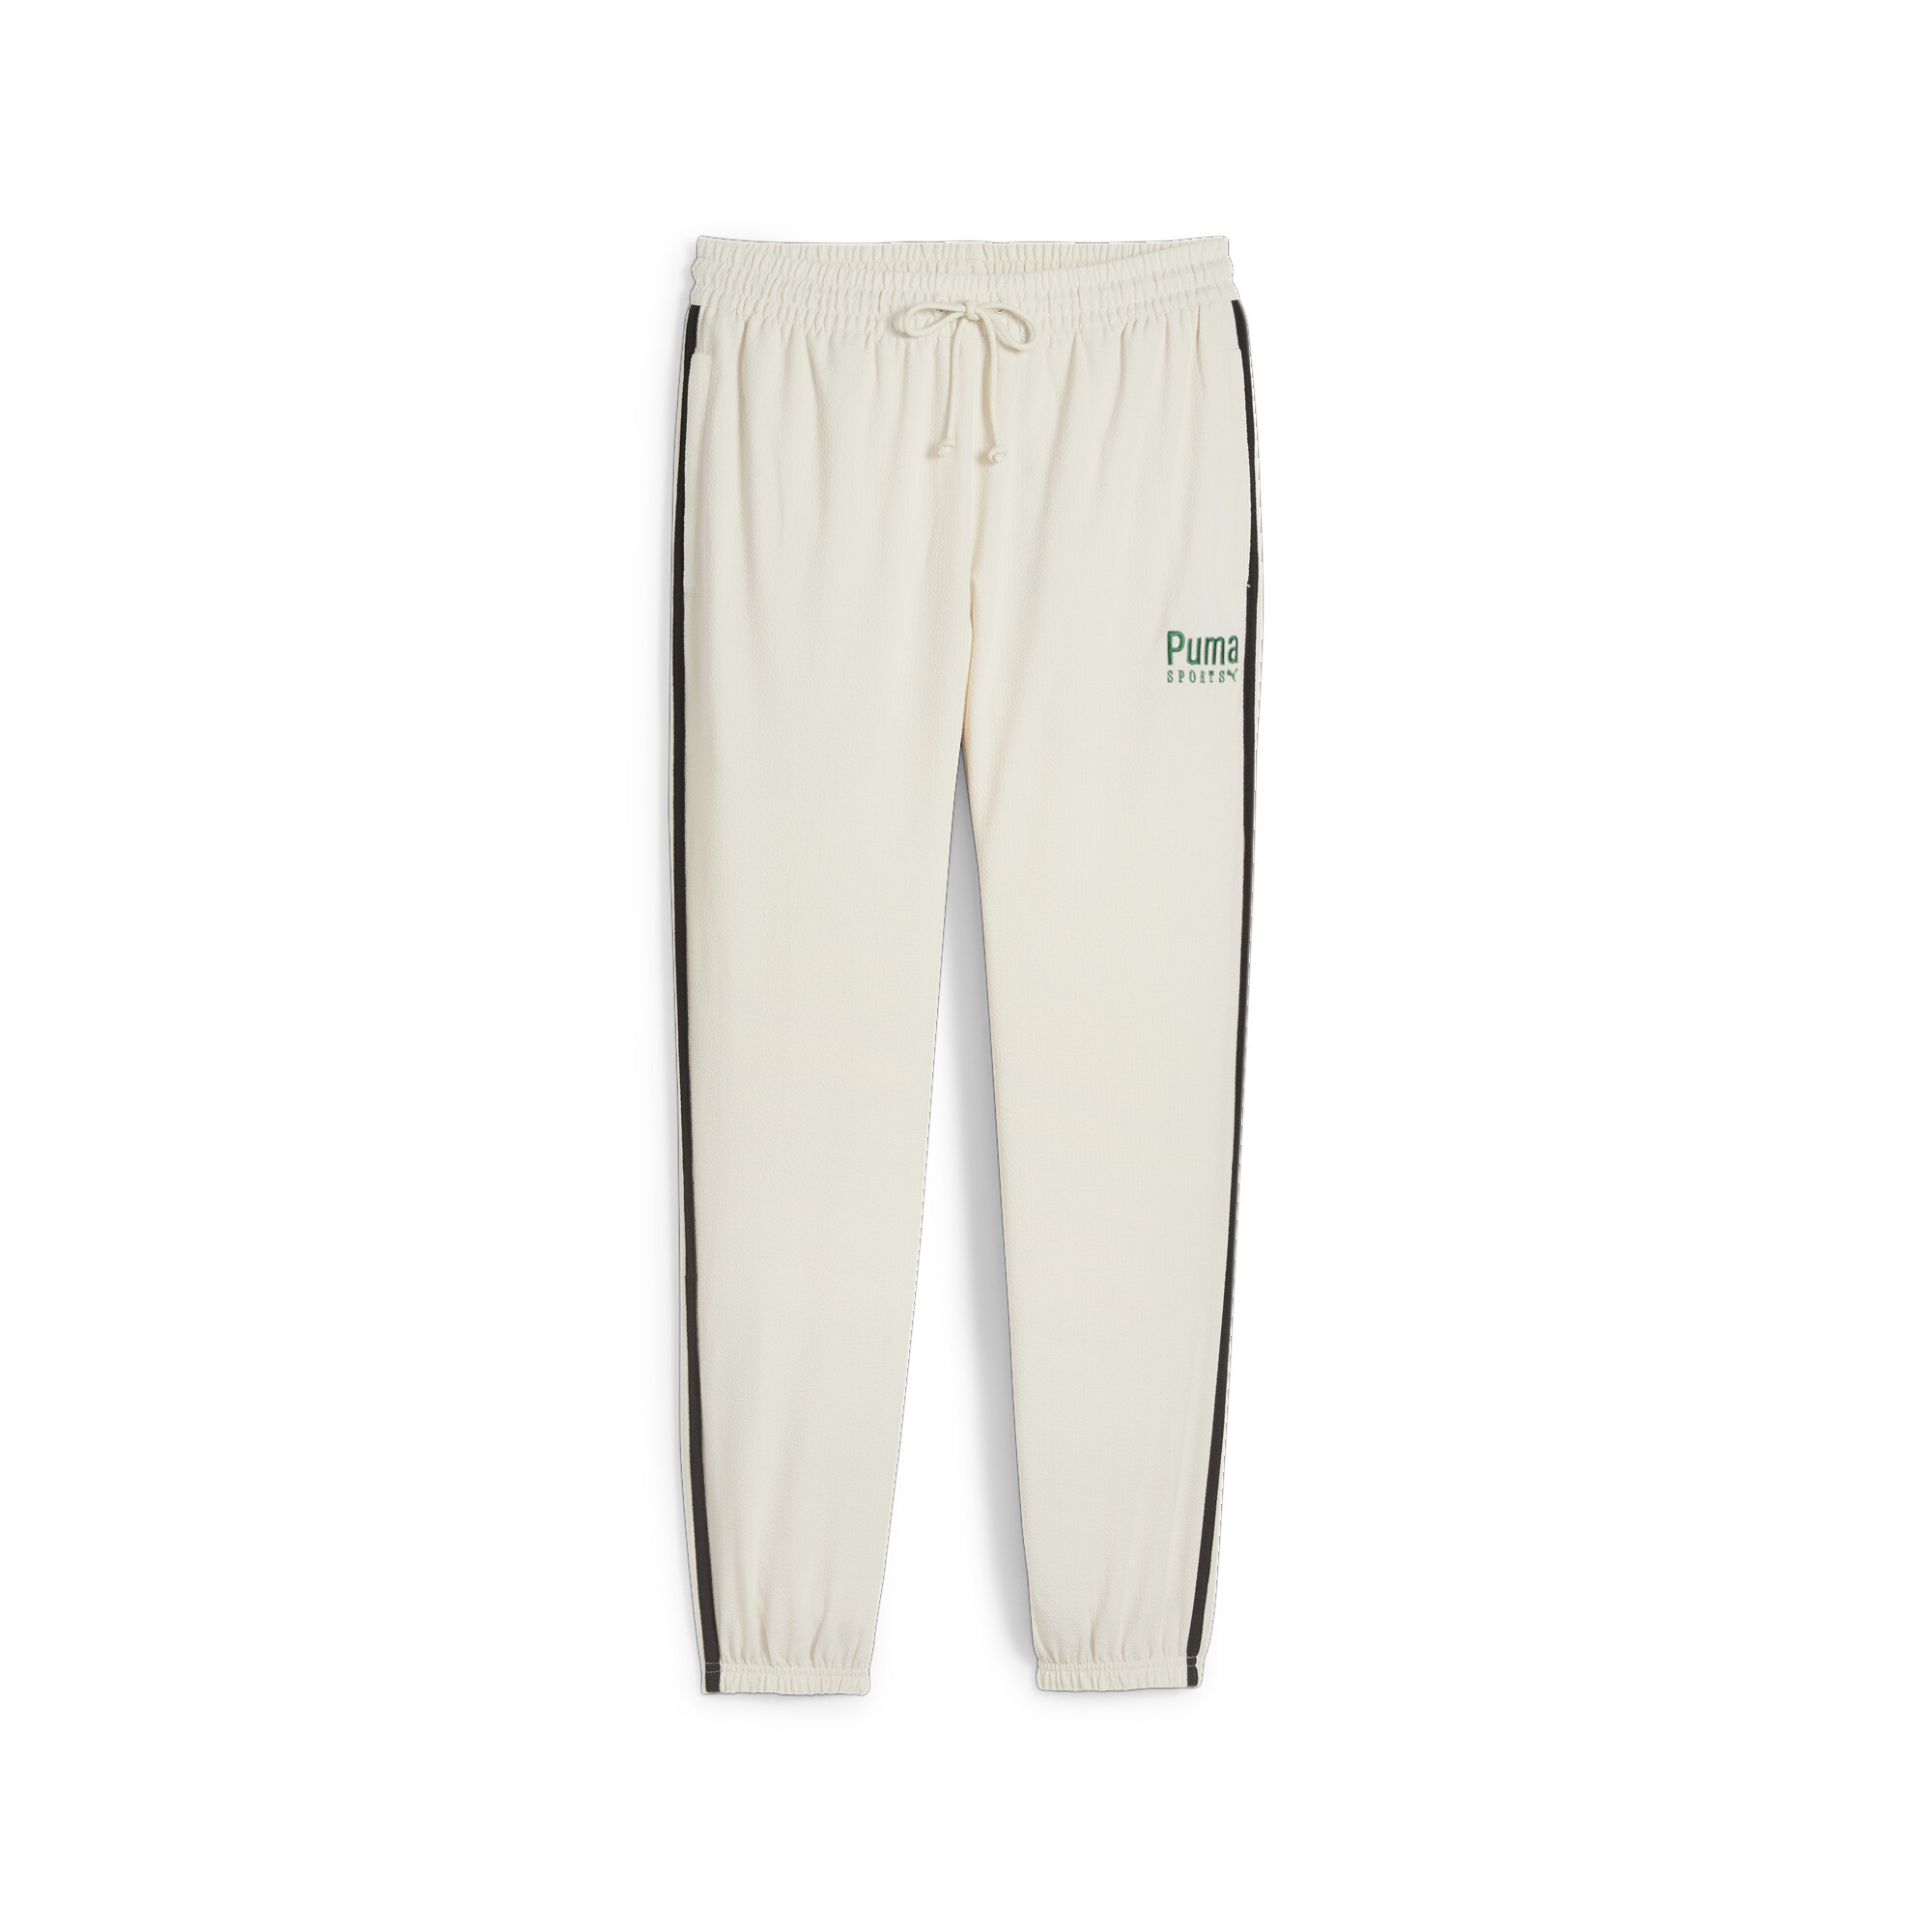 Men's PUMA TEAM Track Pants In White, Size Small